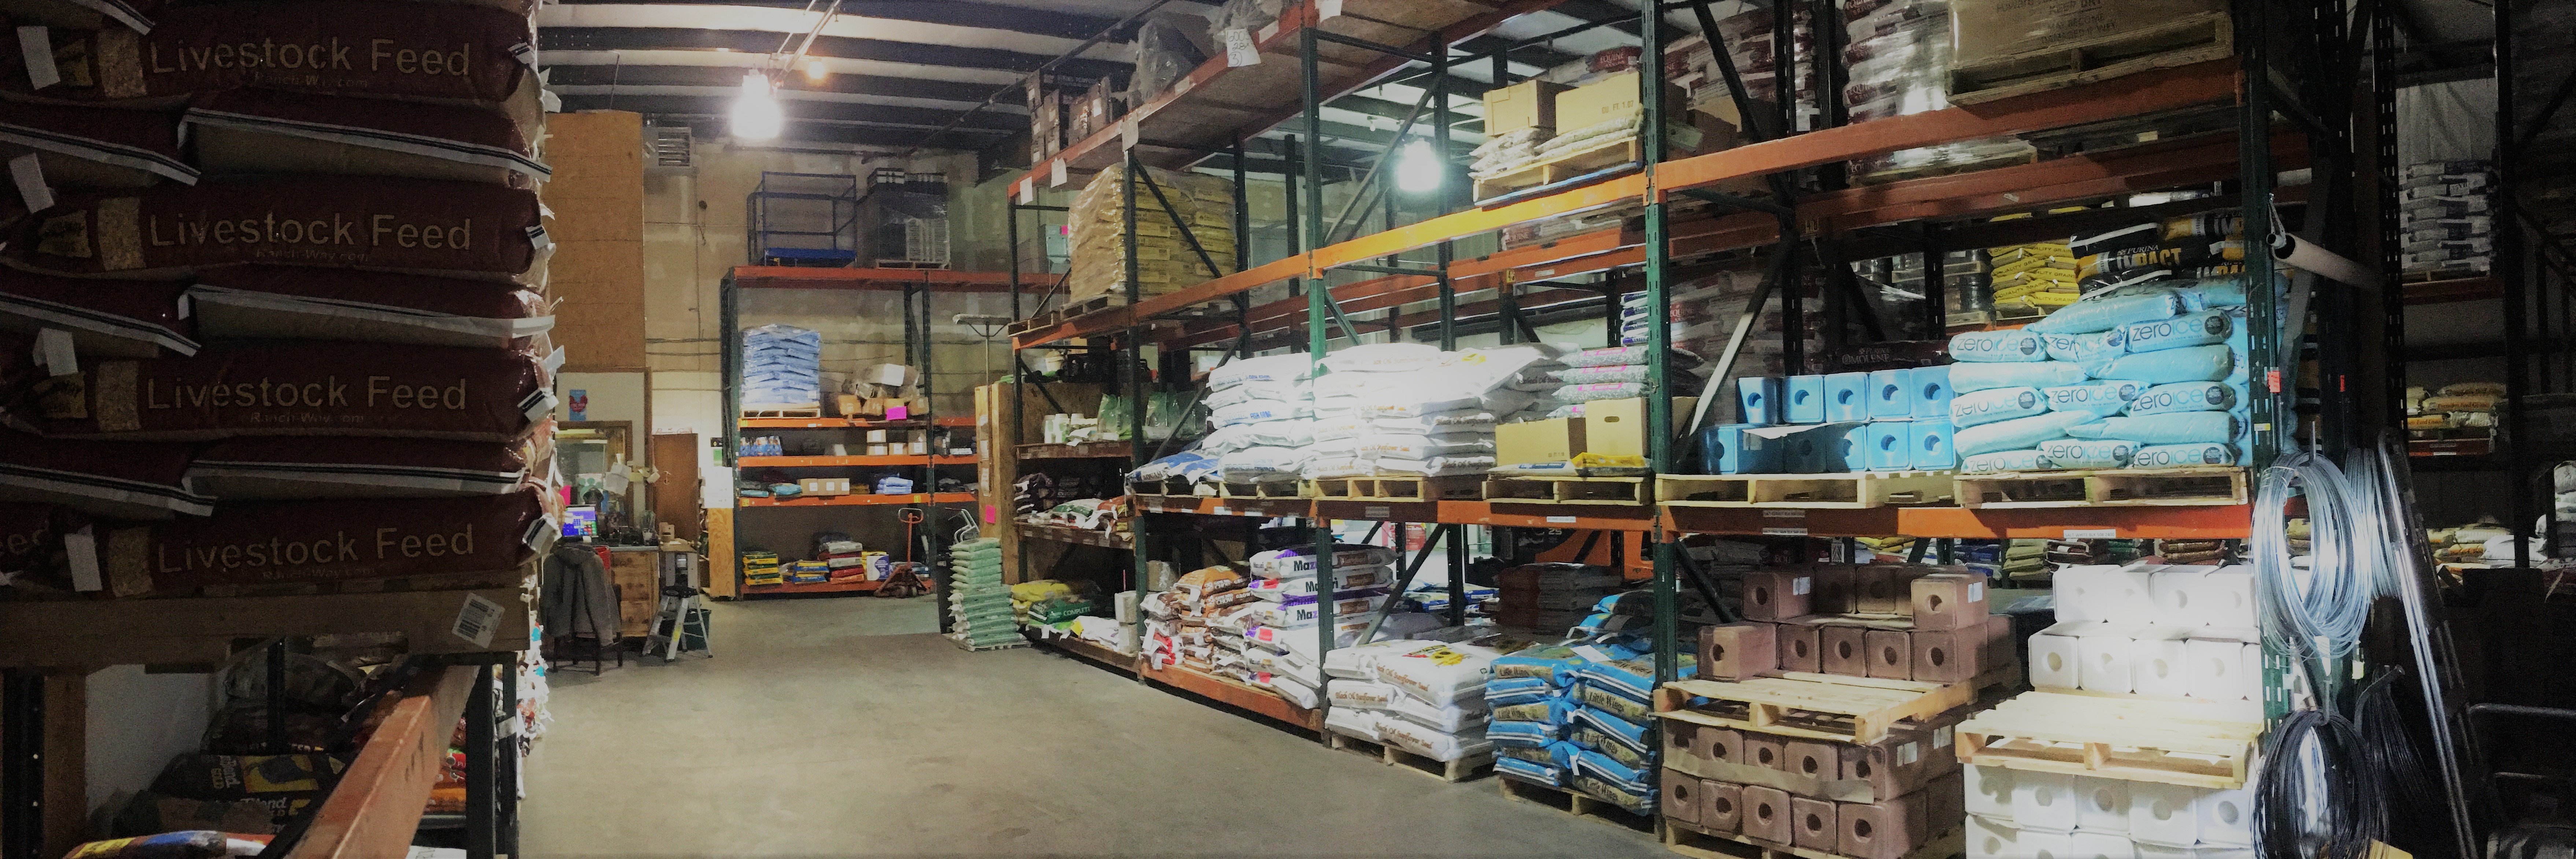 Wide shot of the interior of the warehouse feed section